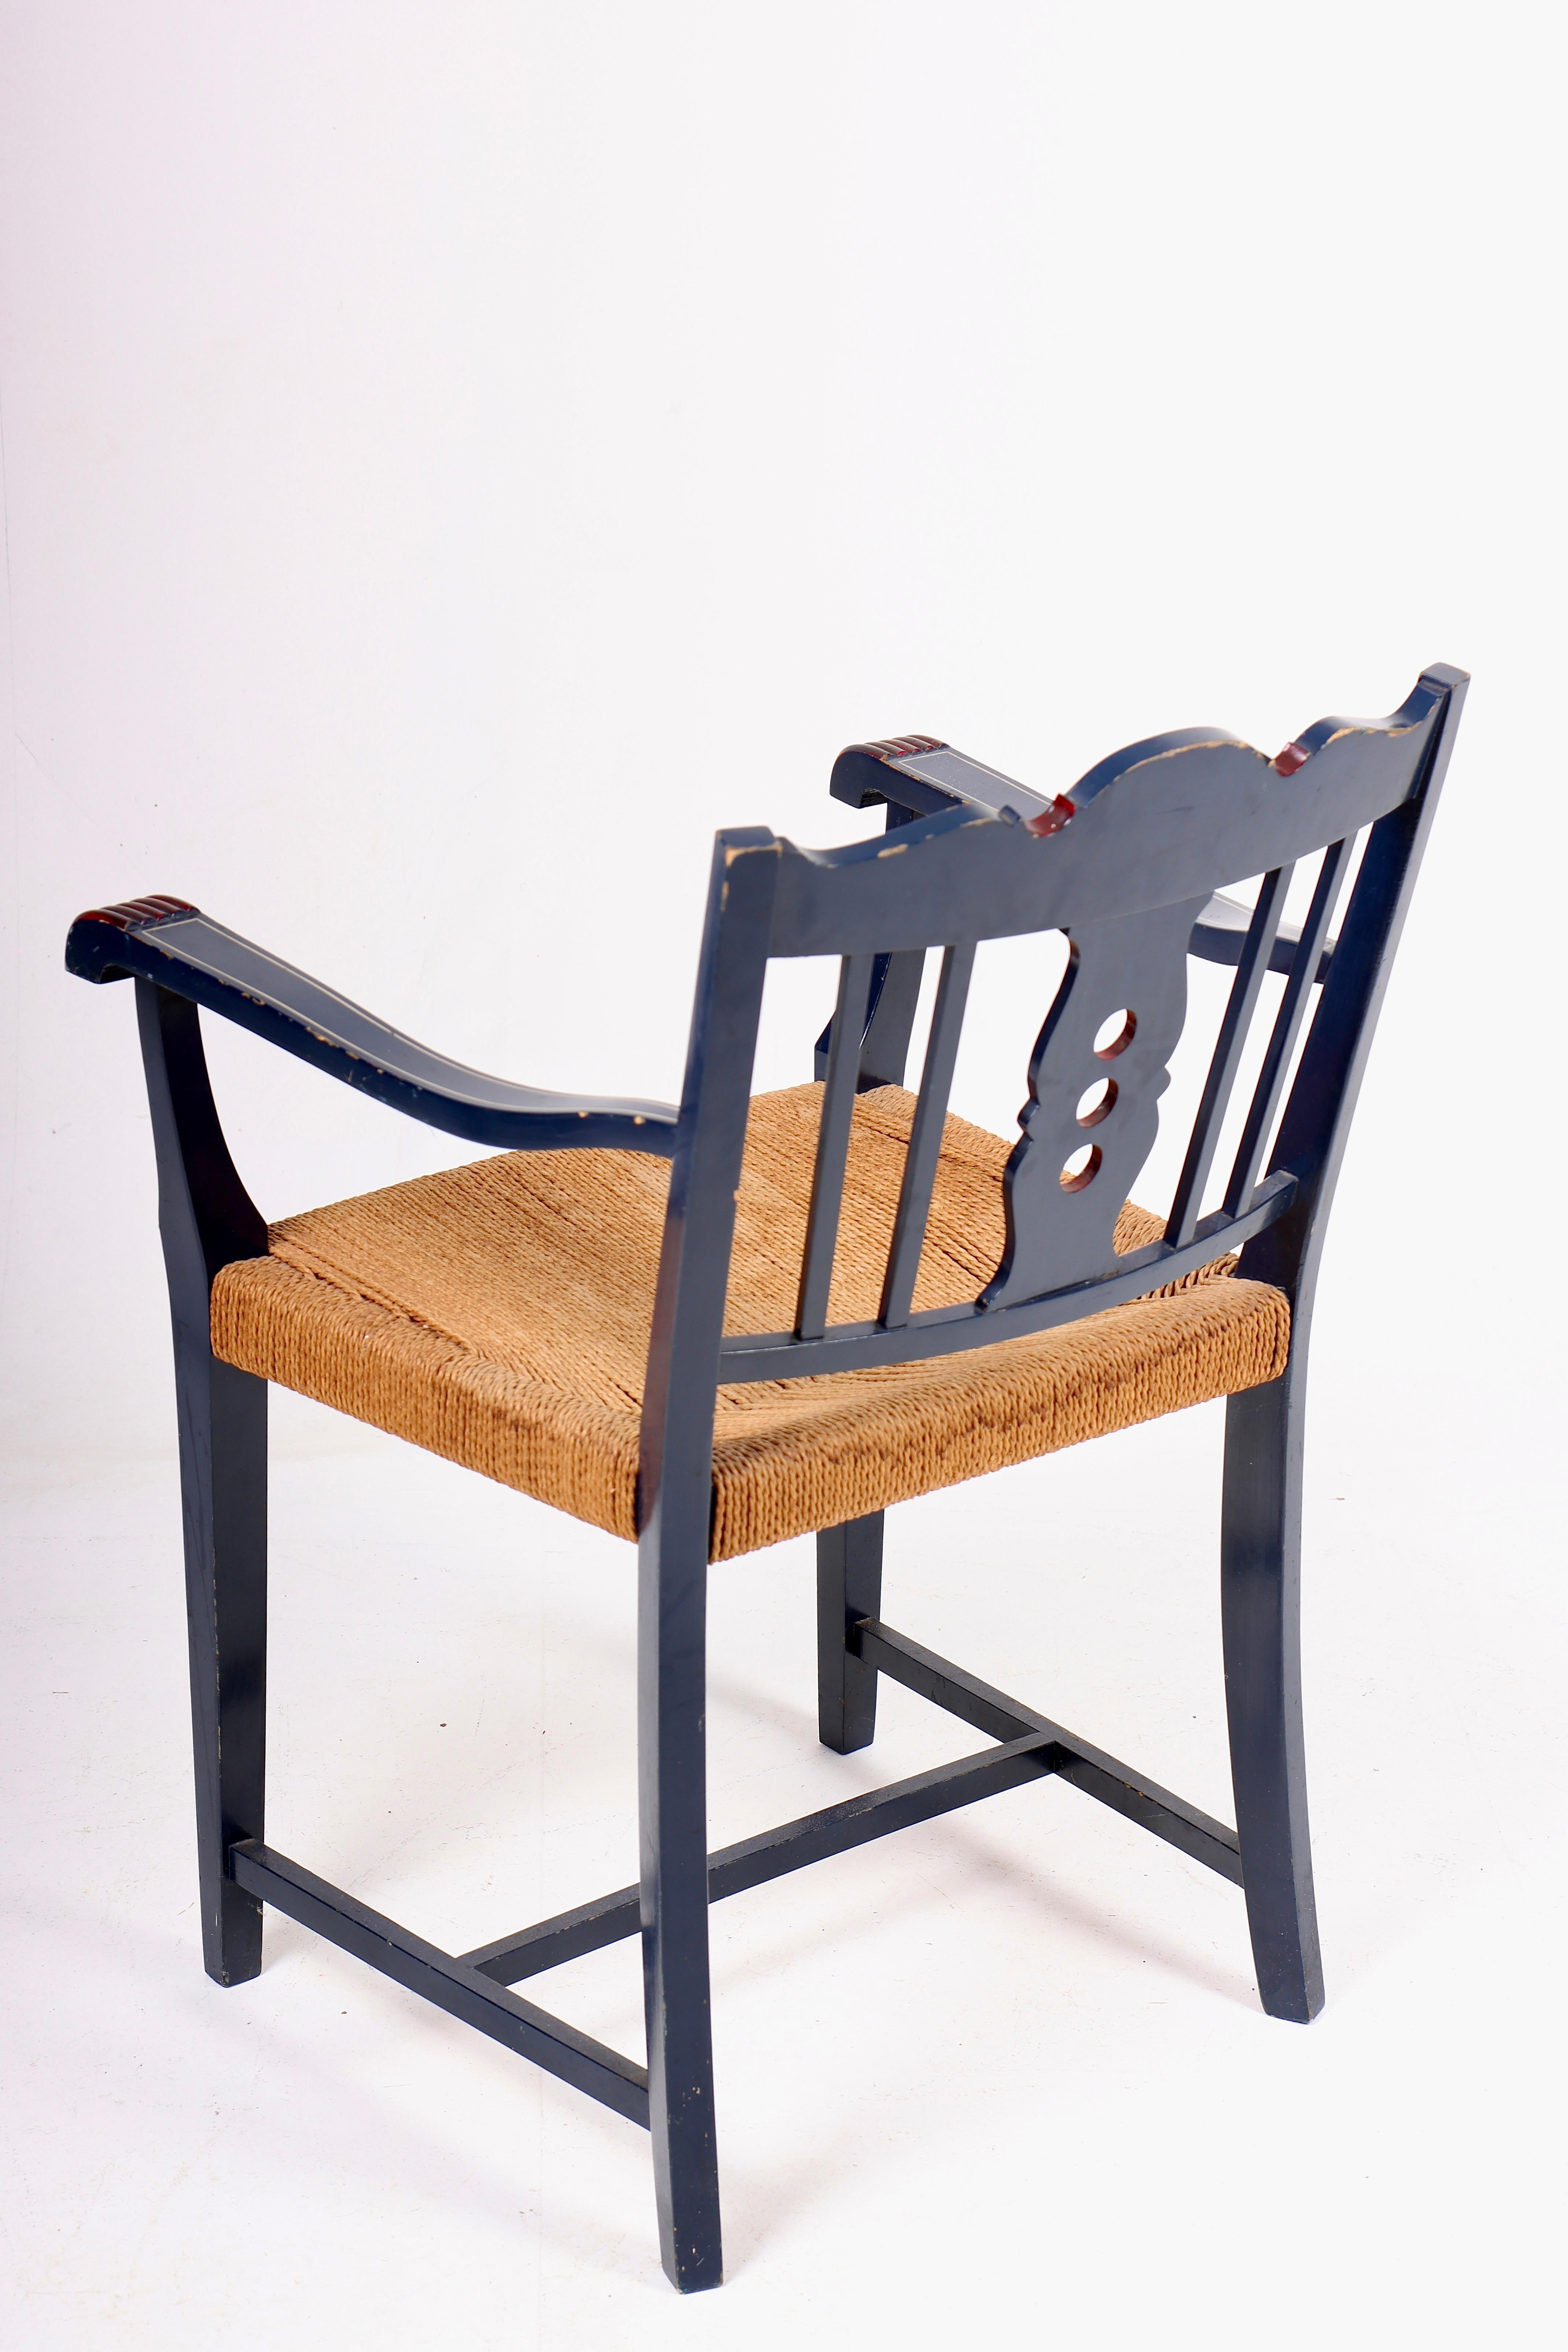 Mid-20th Century Swedish Armchair with Seat in Paper Cord, 1940s For Sale